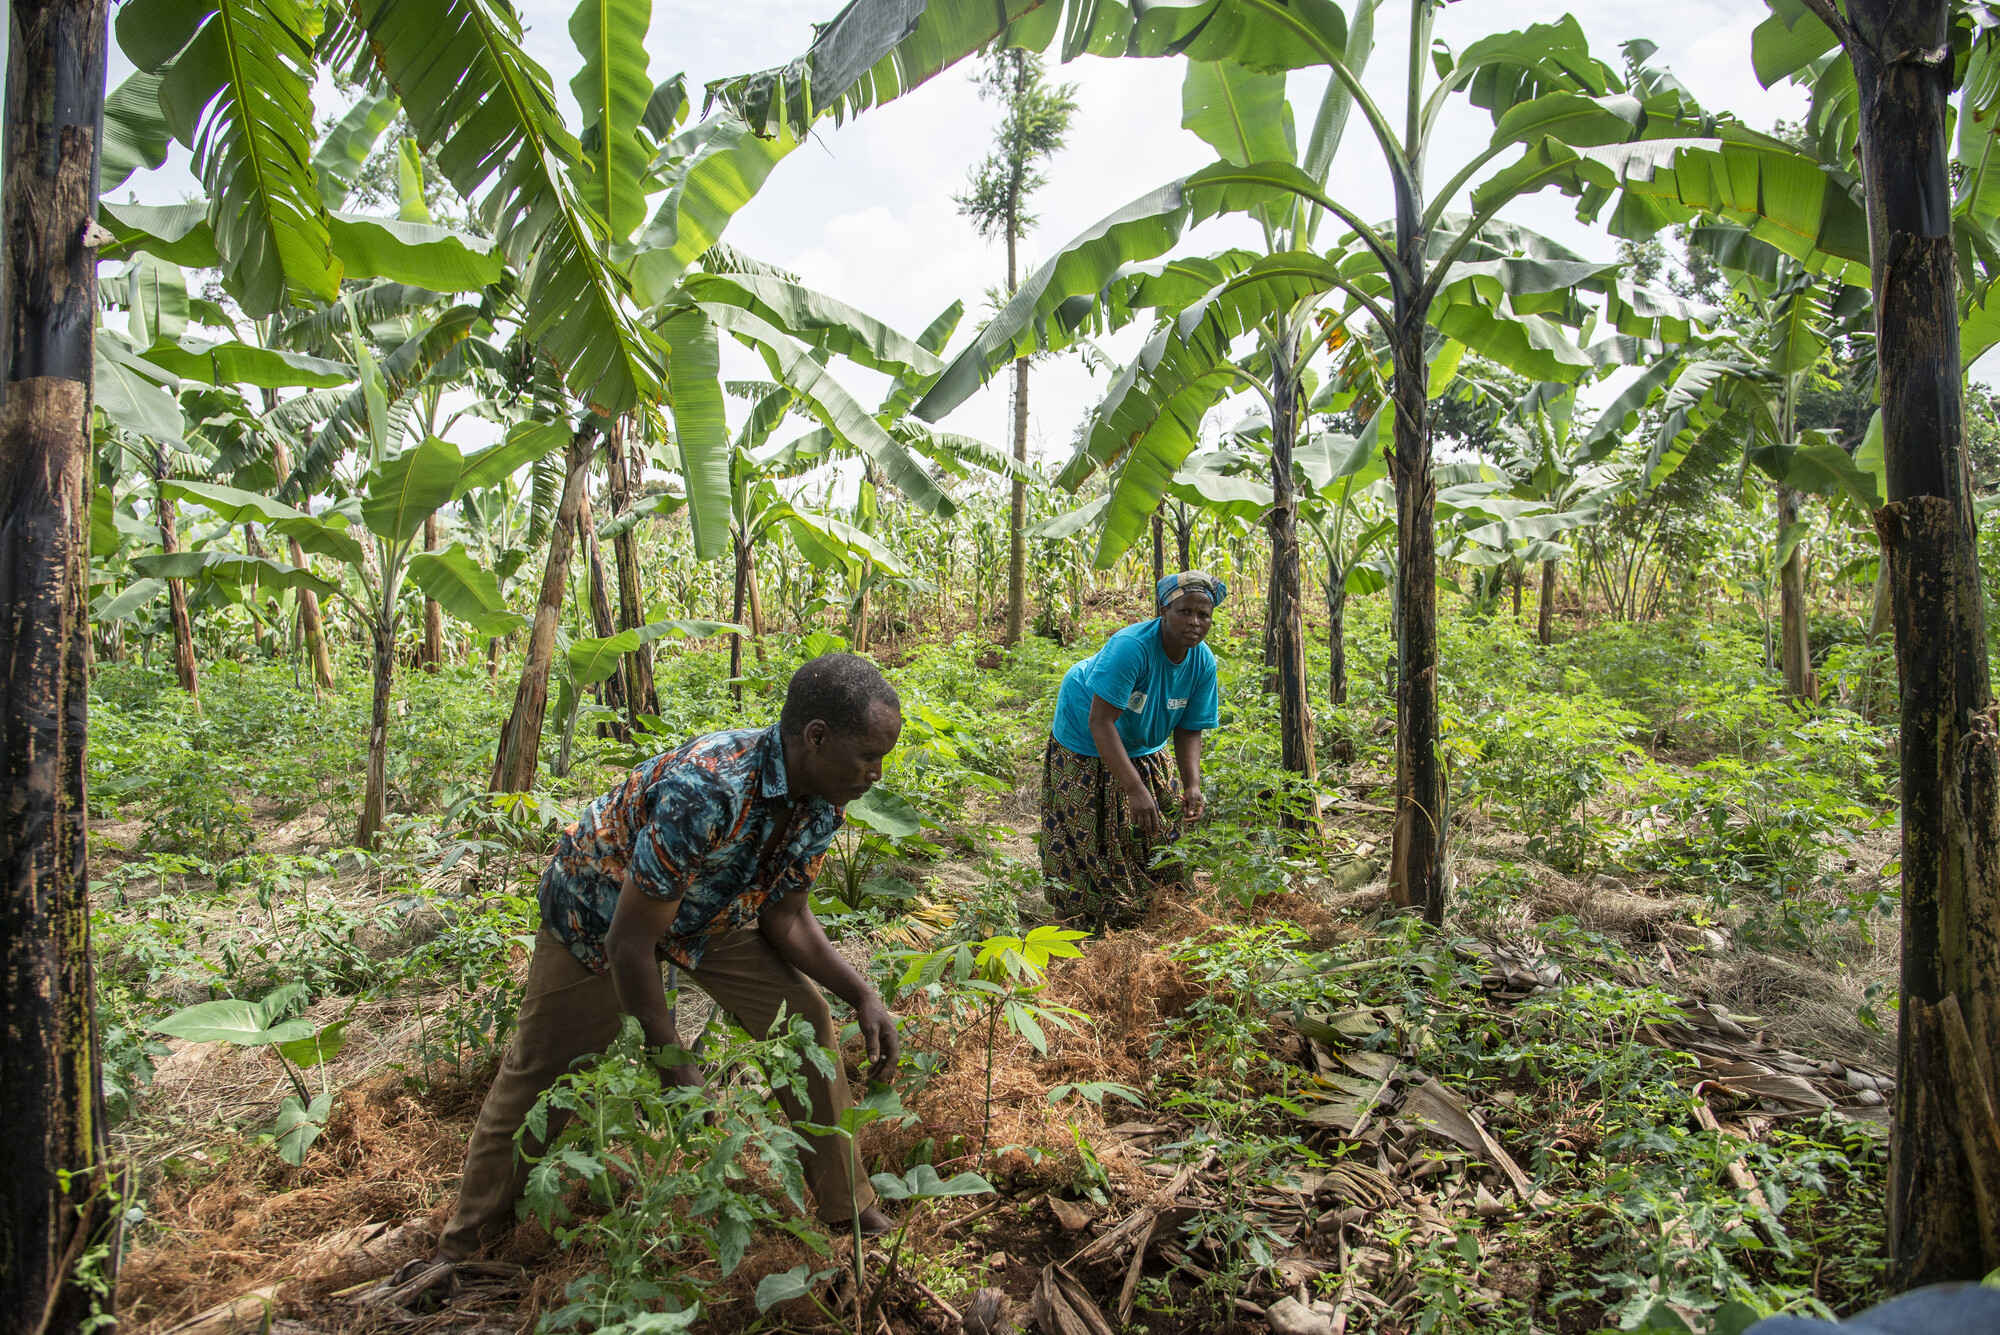 A man and woman harvesting crops in a field covered with lush trees